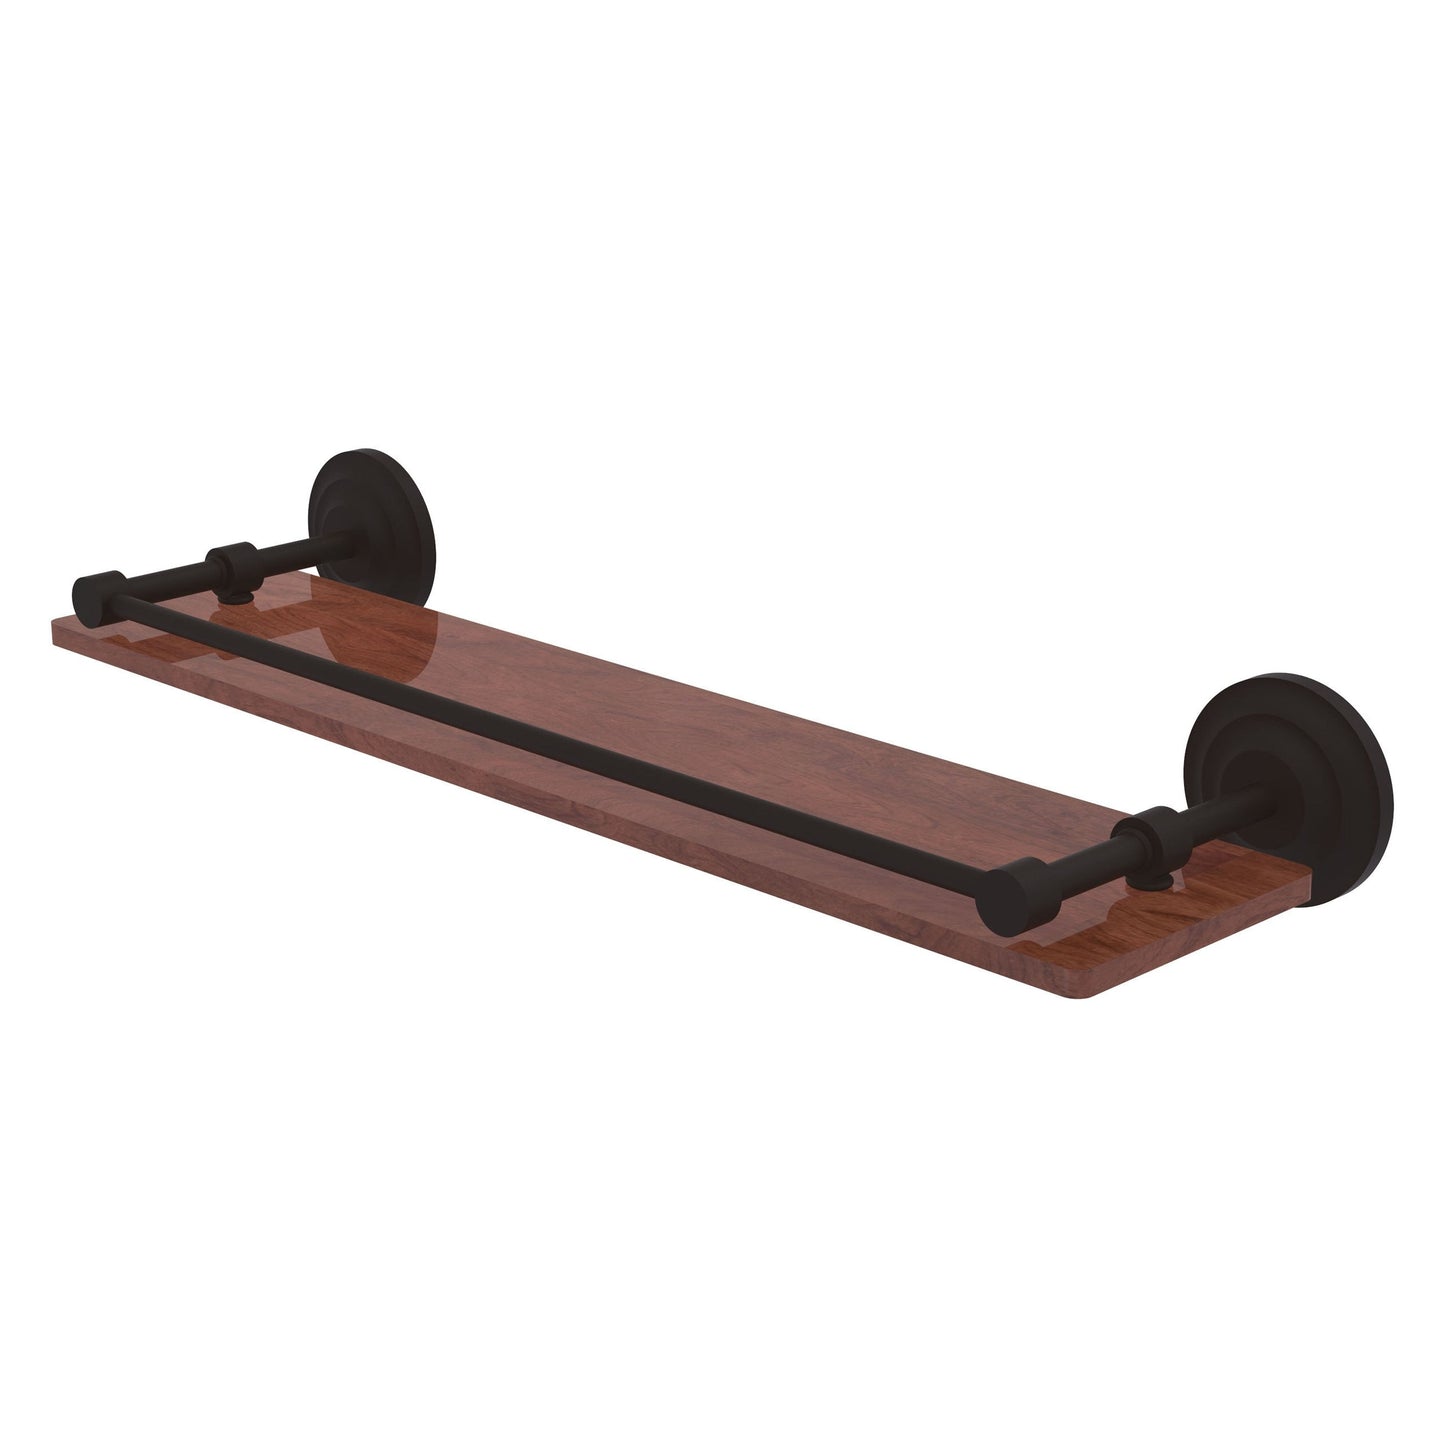 Allied Brass Que New 22" x 5" Oil Rubbed Bronze Solid Brass 22-Inch Solid IPE Ironwood Shelf With Gallery Rail